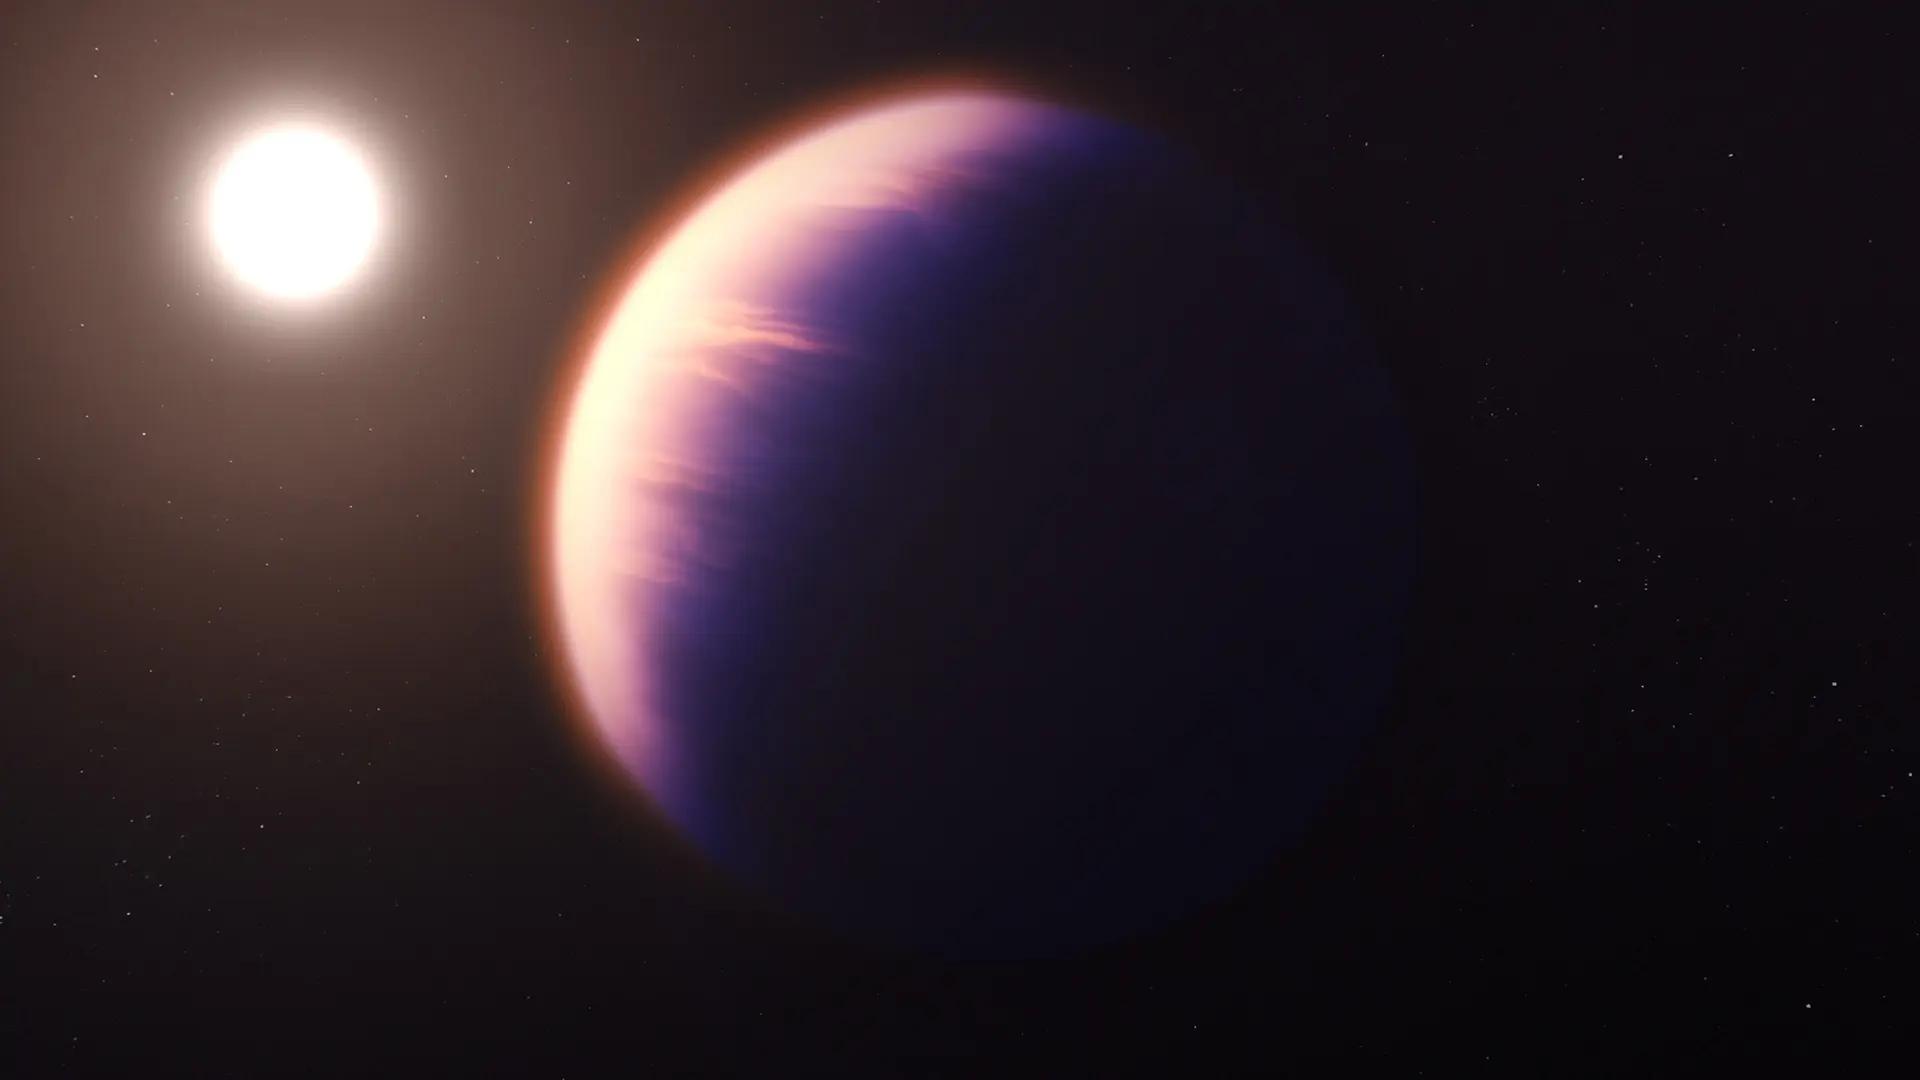 Illustration of an exoplanet orbiting a star